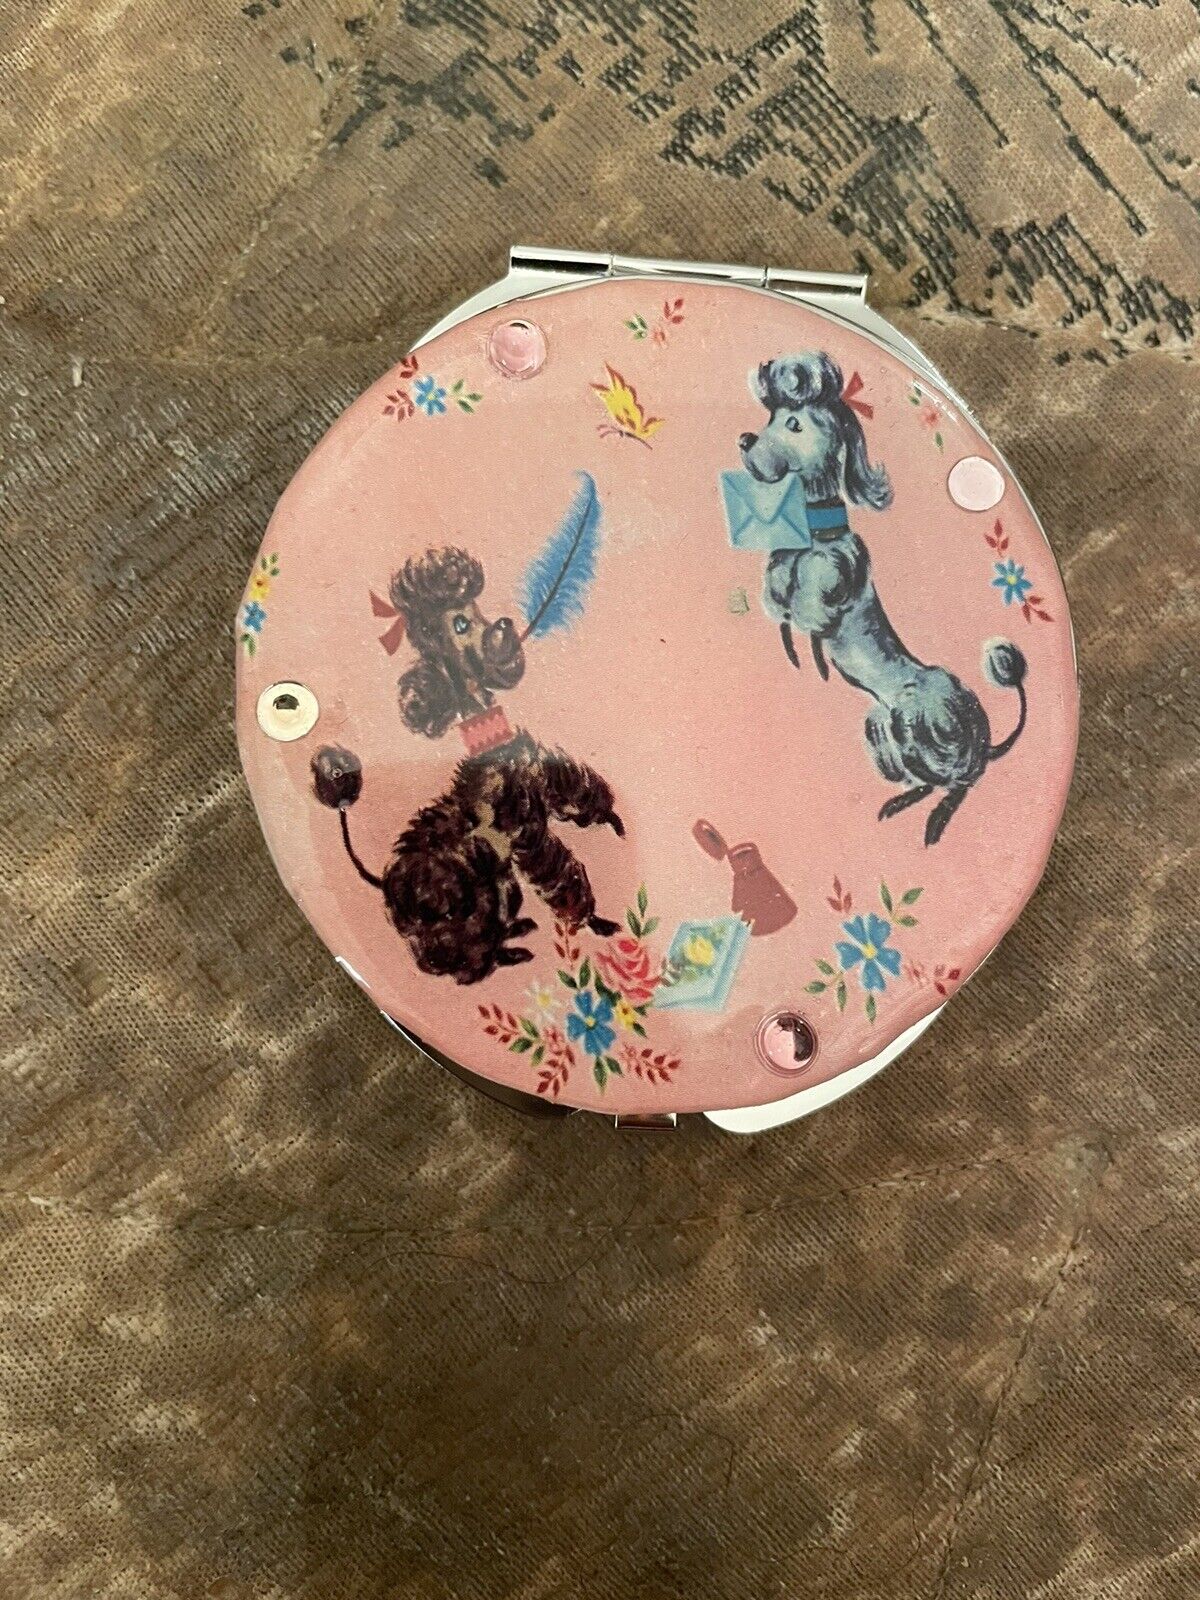 Retro 1950s Pink Poodle Bejeweled Round Silver Mirror Compact